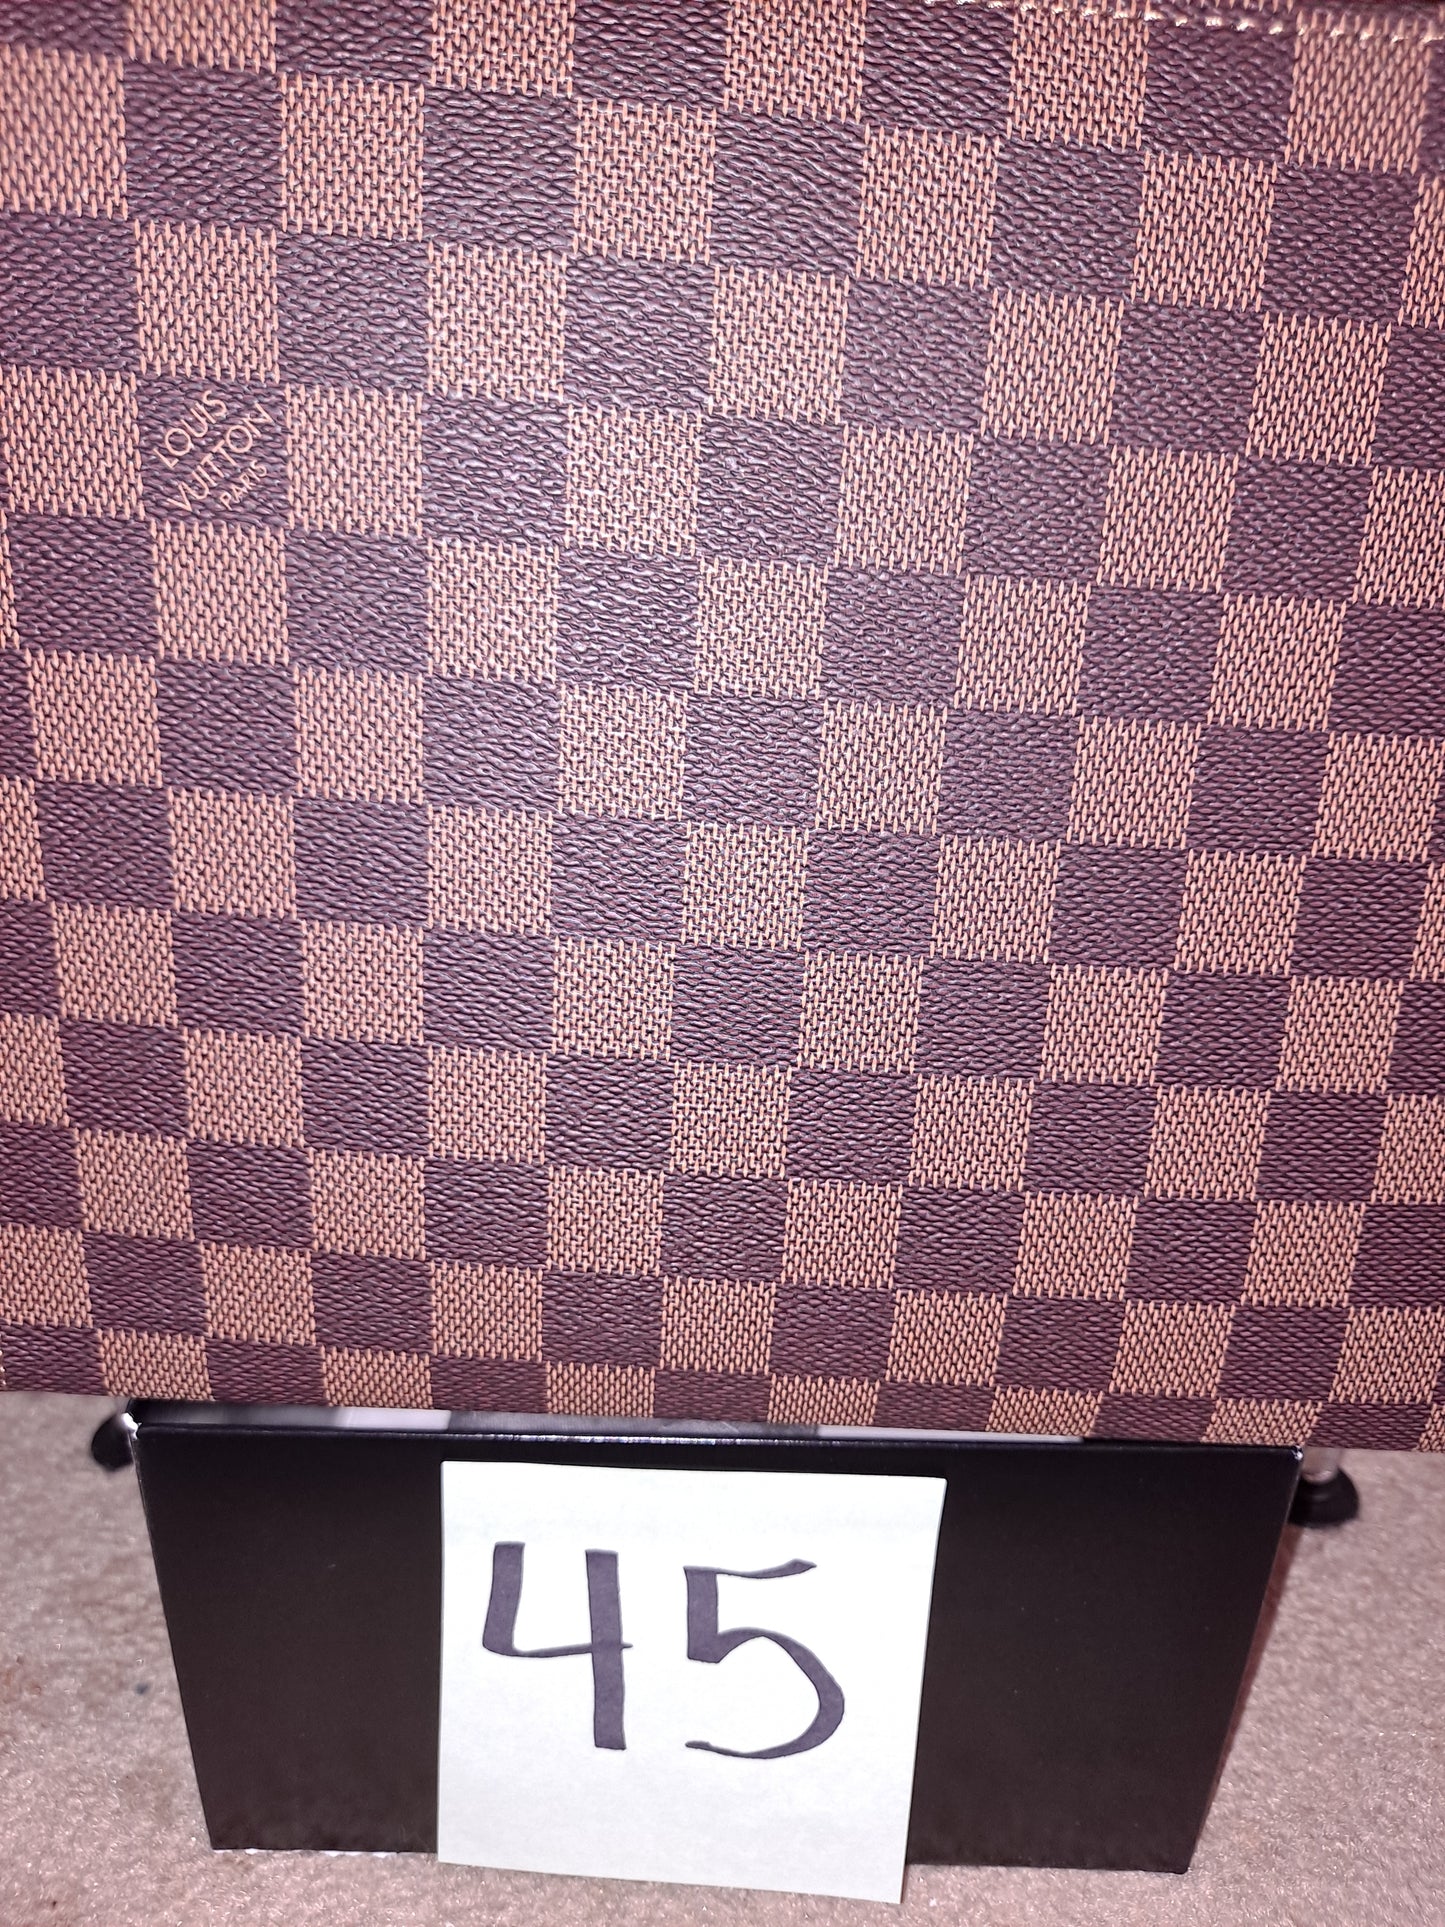 #45 LV Brown check clutch Bag. CLEARANCE